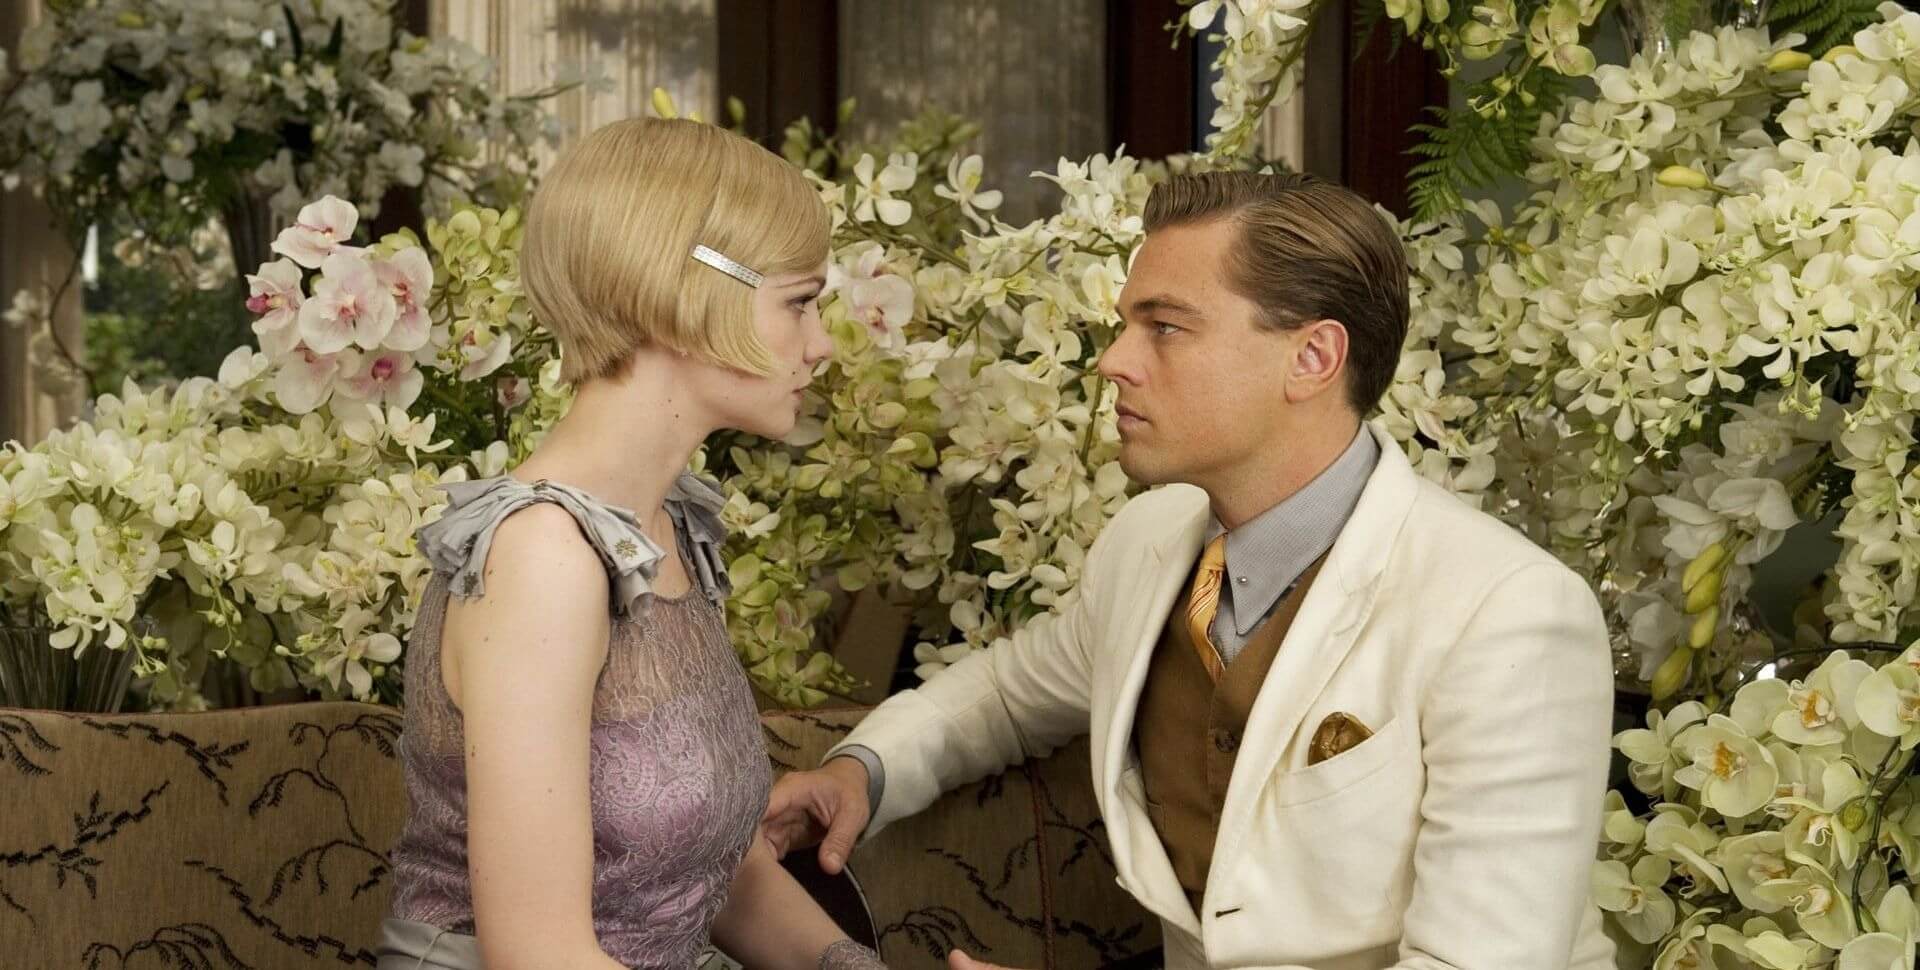 The Great Gatsby instal the last version for apple